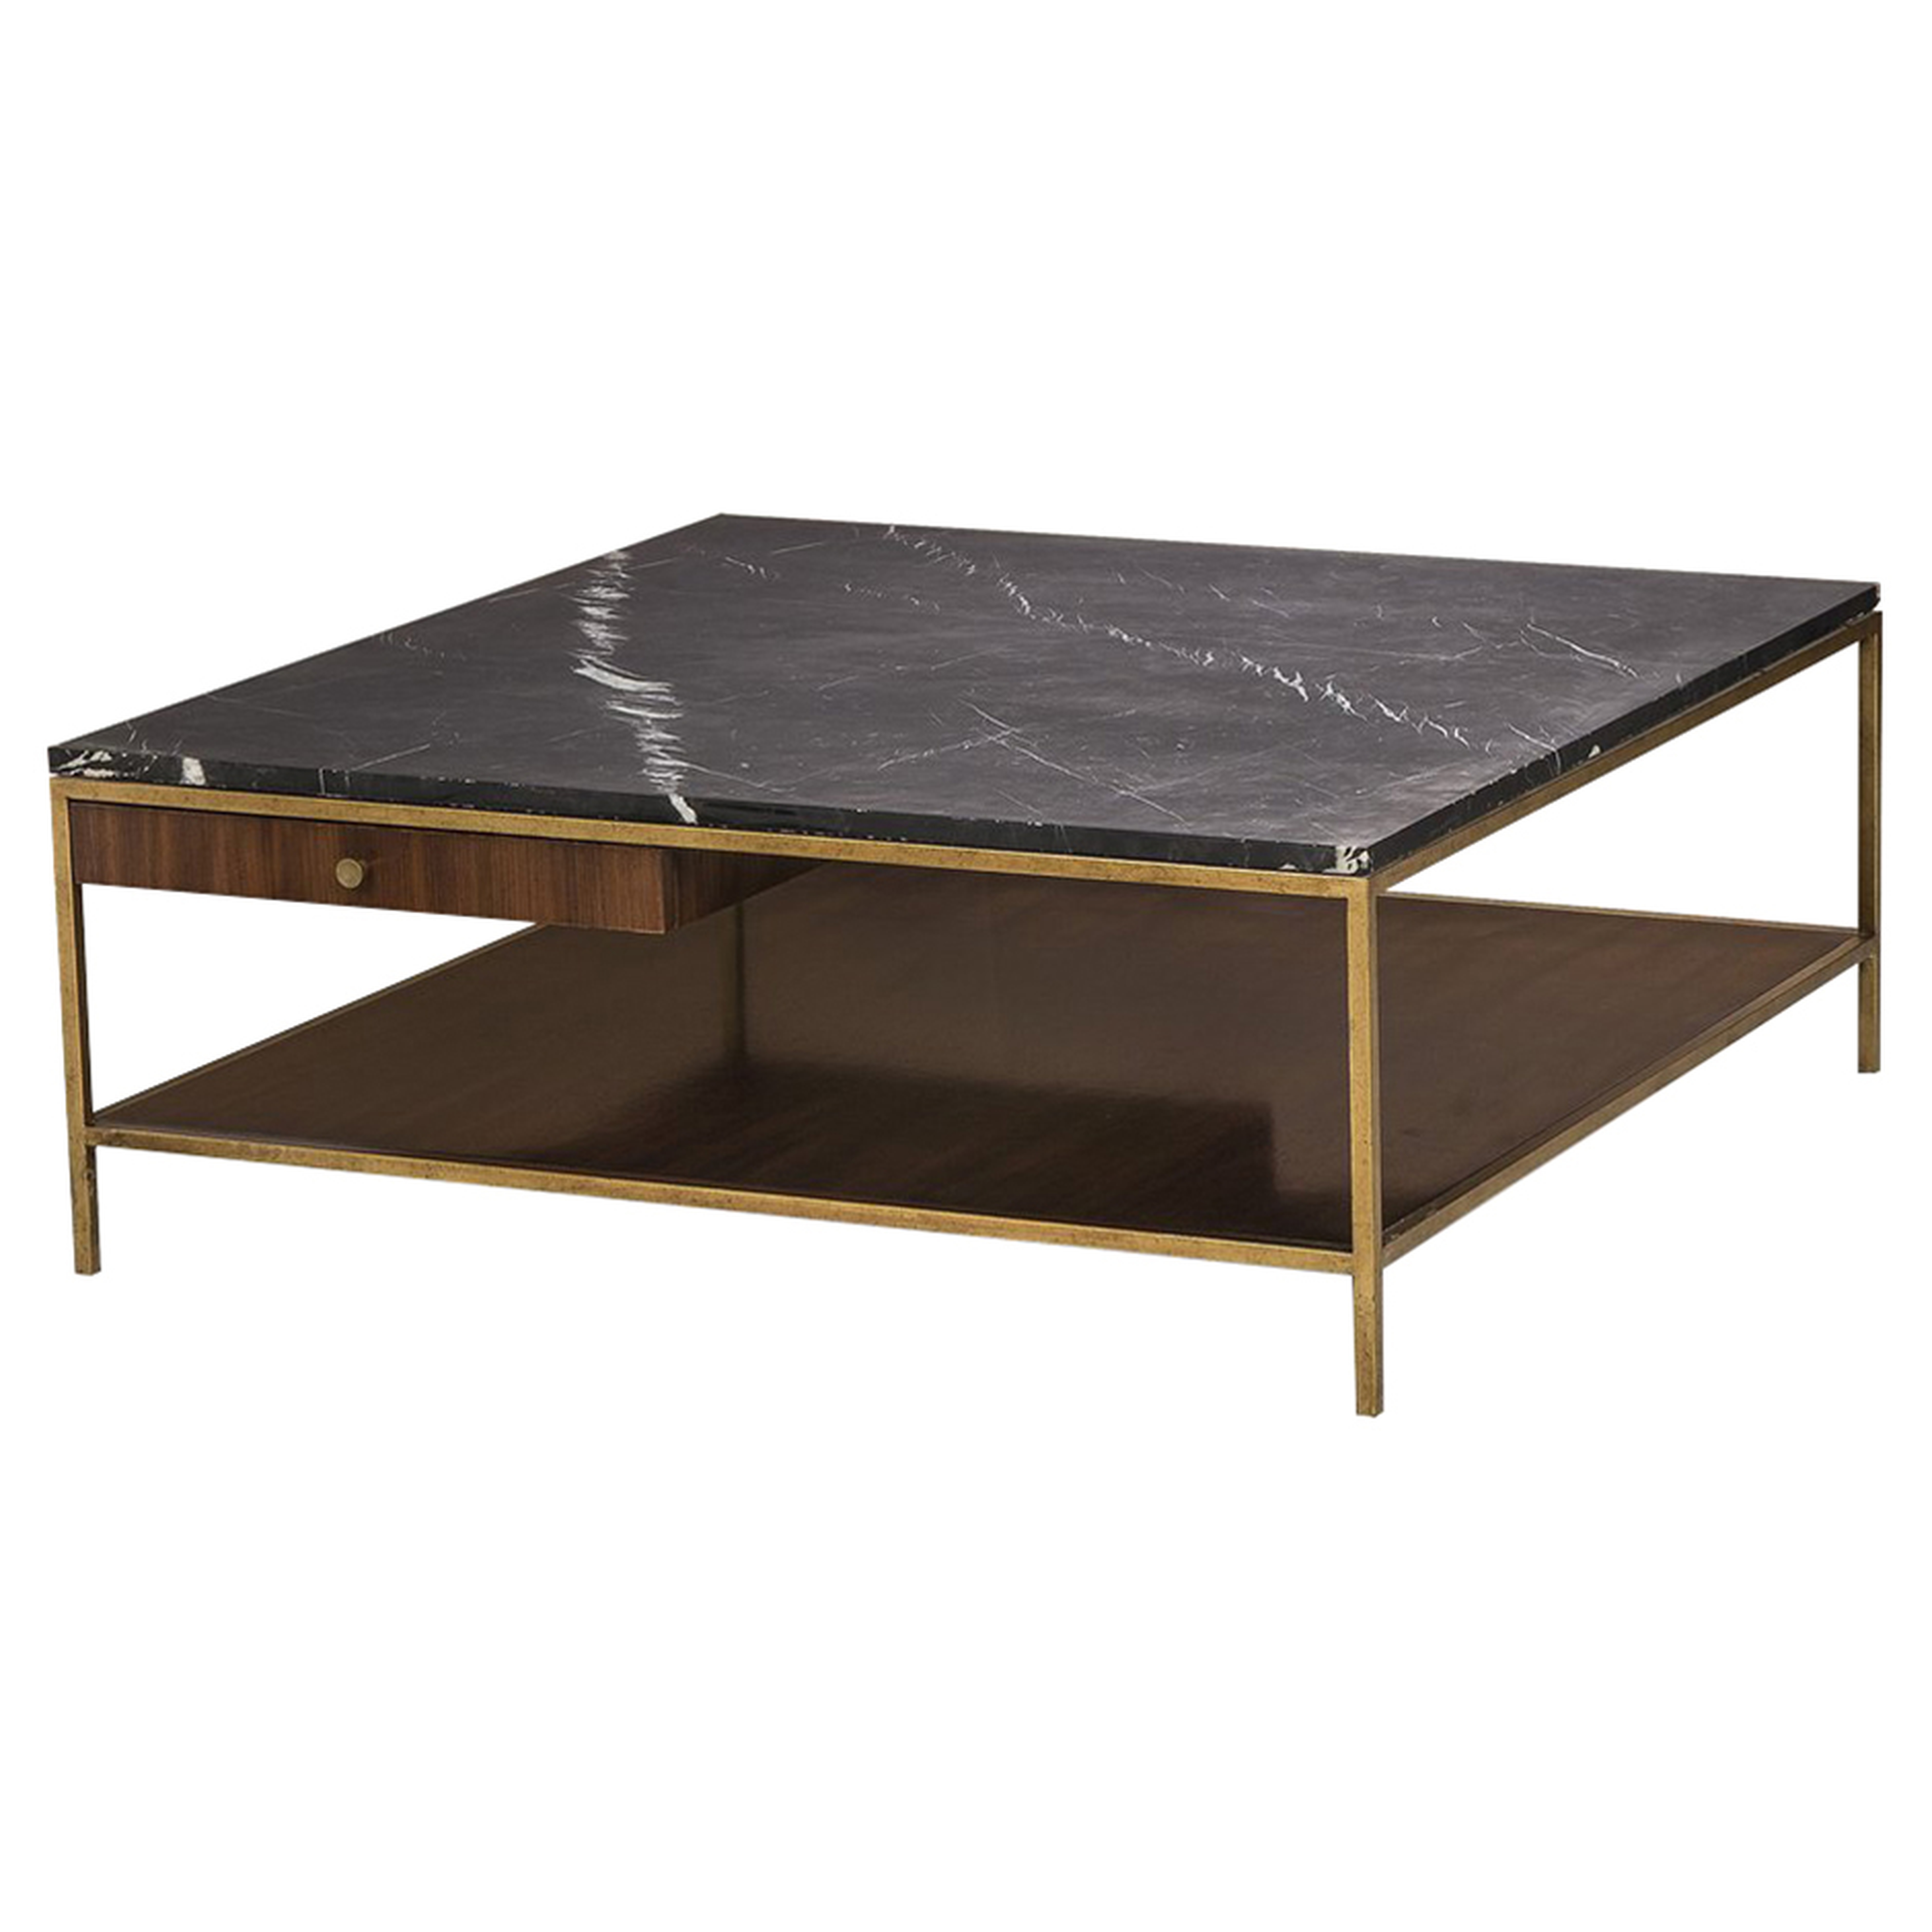 Resource Decor Copeland Mid Century Modern Black Marble Gold Coffee Table - Kathy Kuo Home